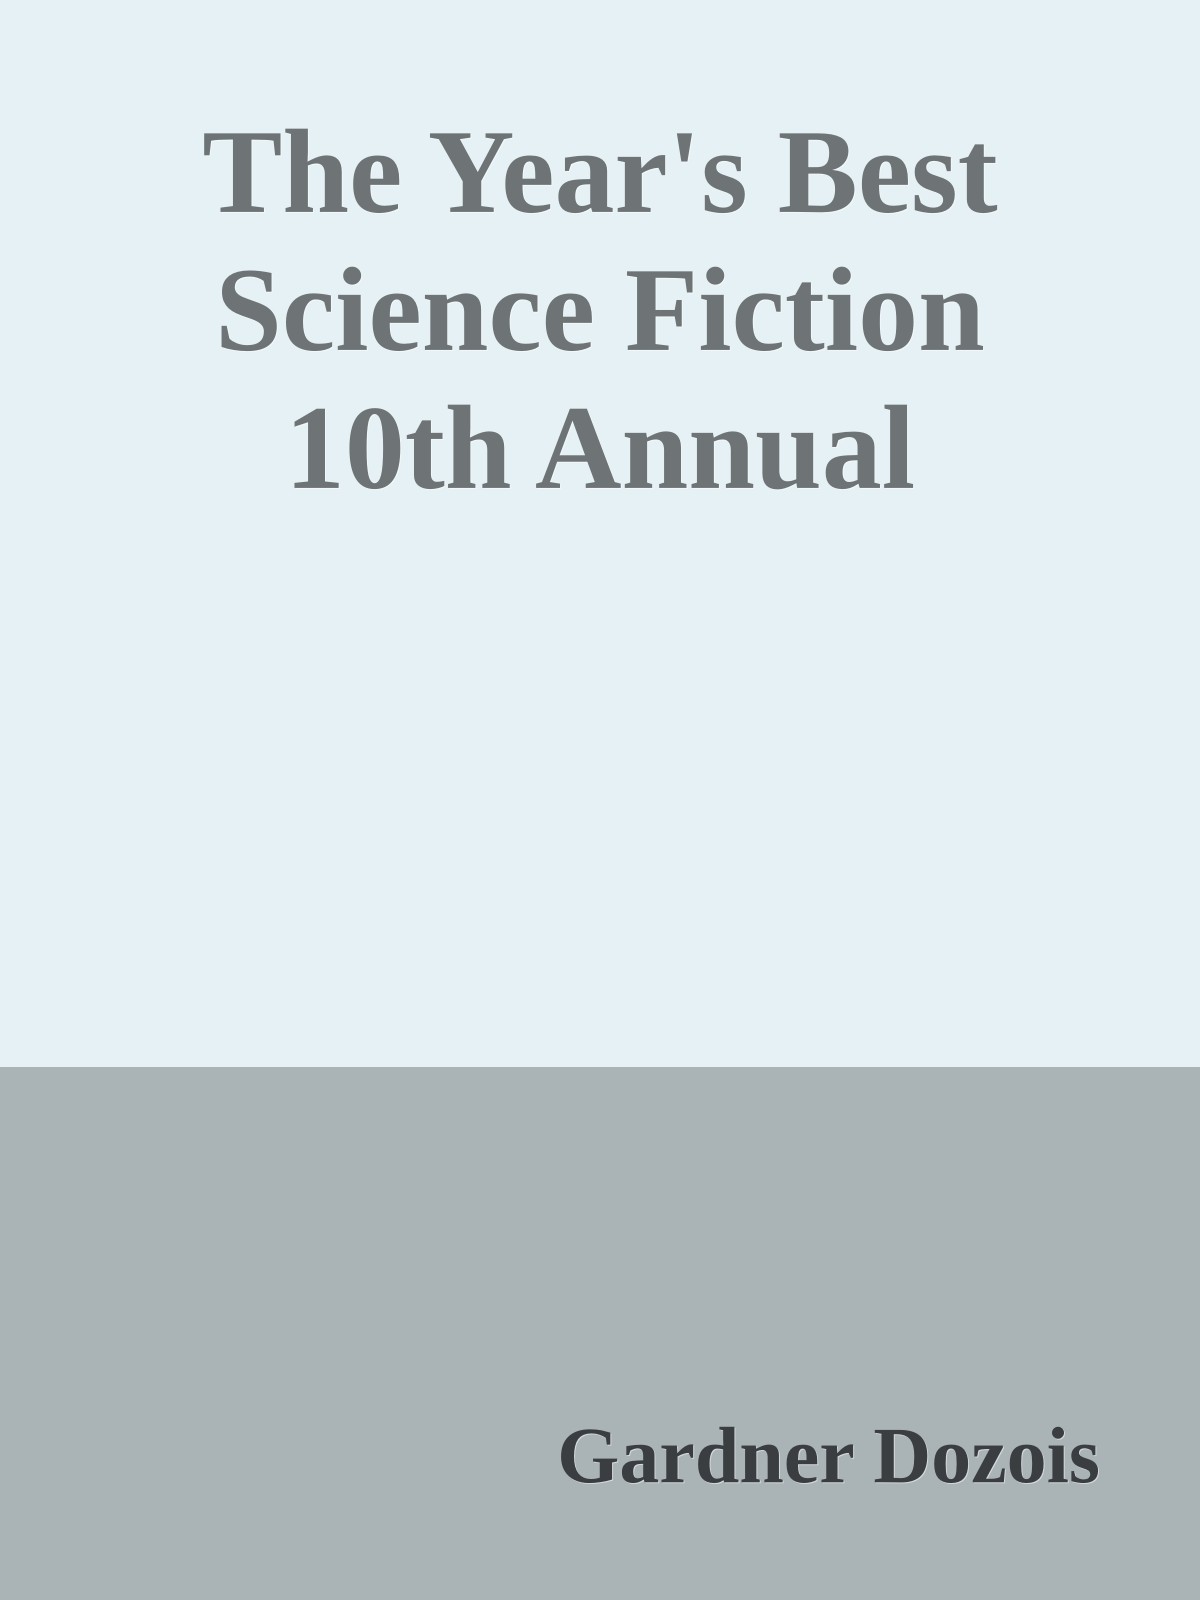 The Year's Best Science Fiction 10th Annual